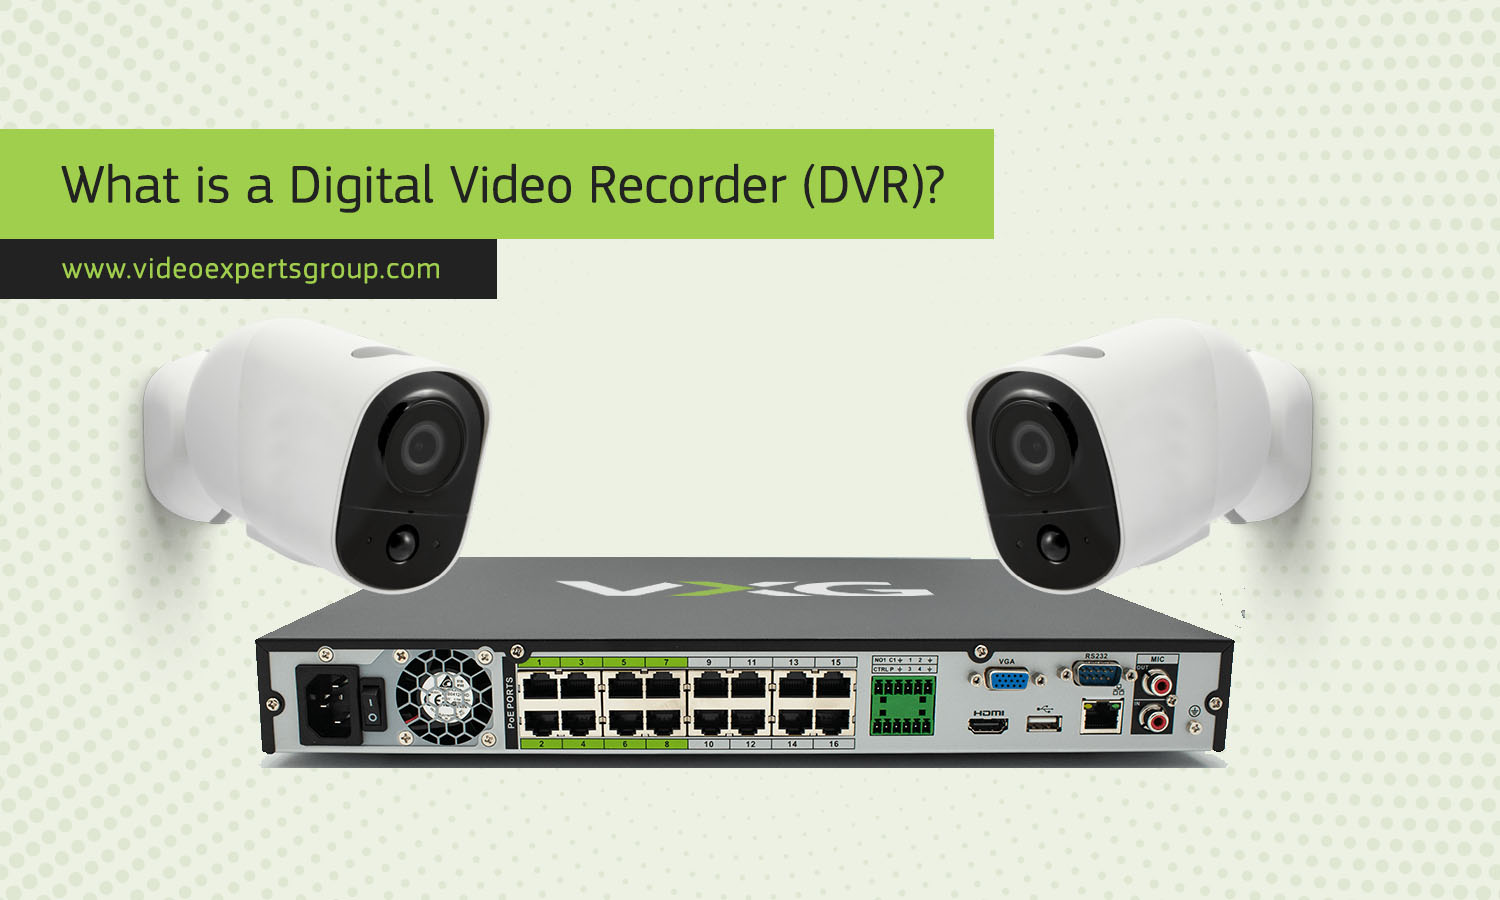 What is a DVR?